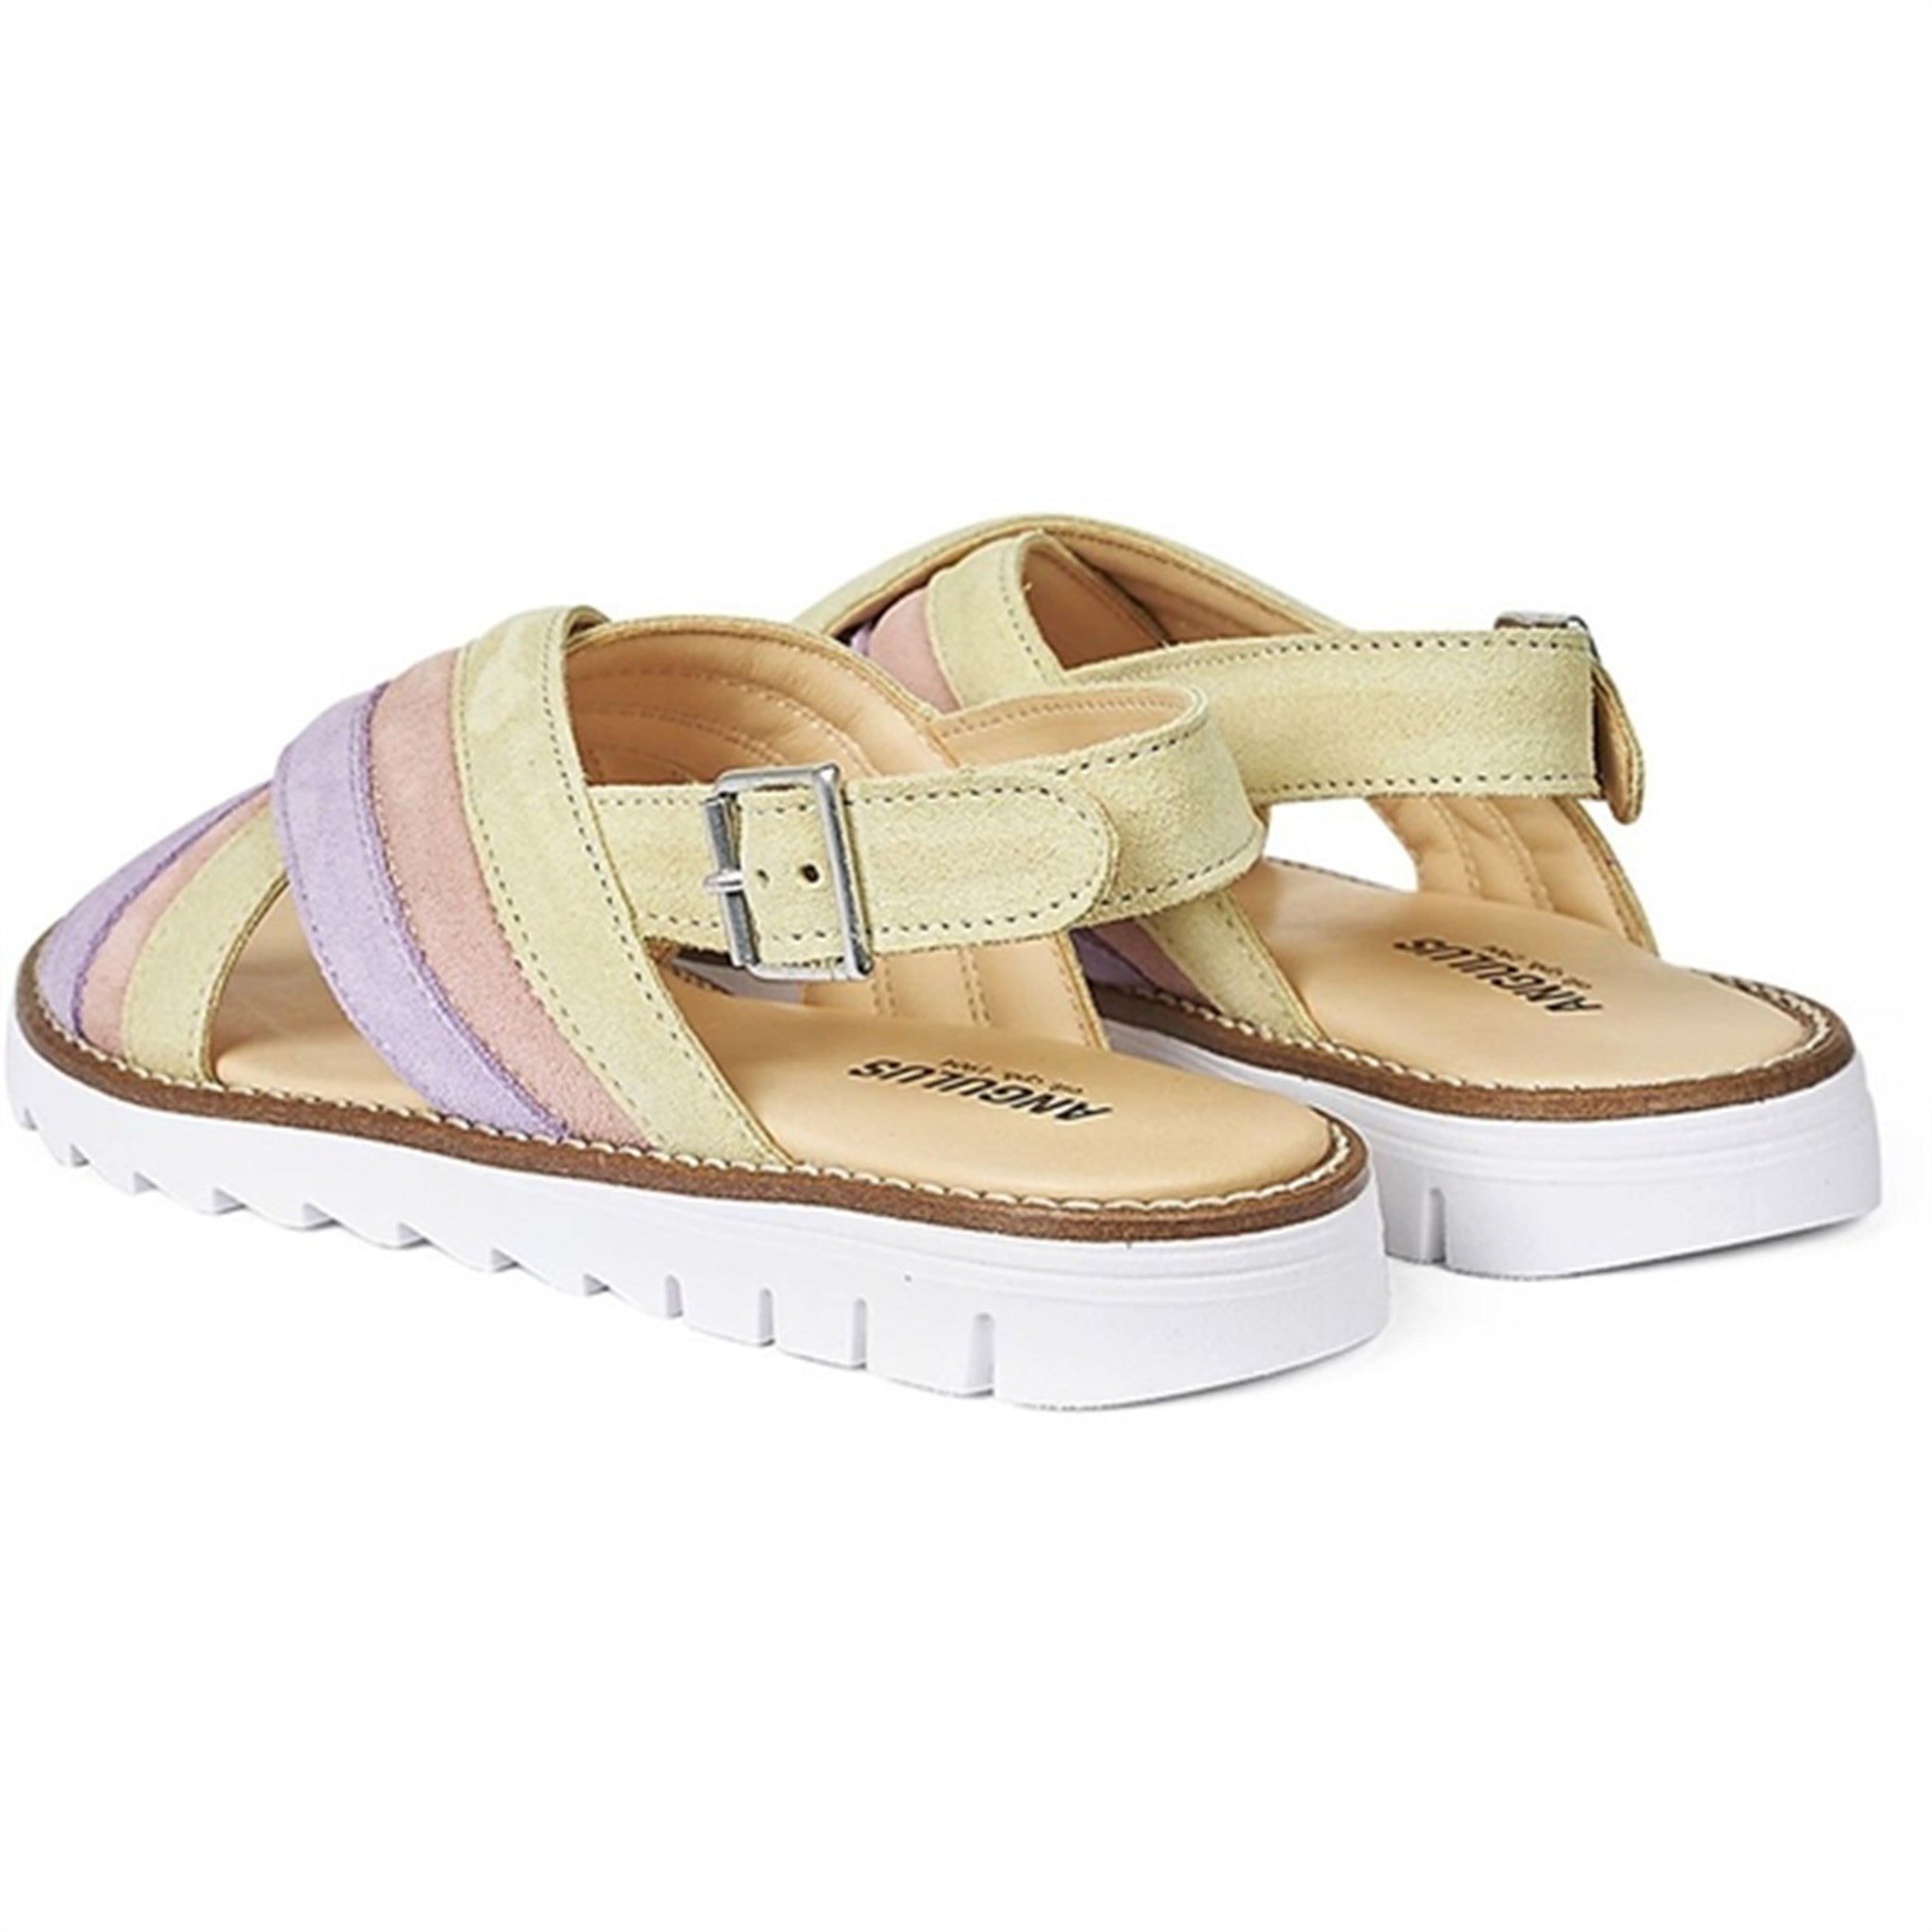 Angulus Sandal W. Open Toe And Buckle Lilac/Peach/Light Yellow 3